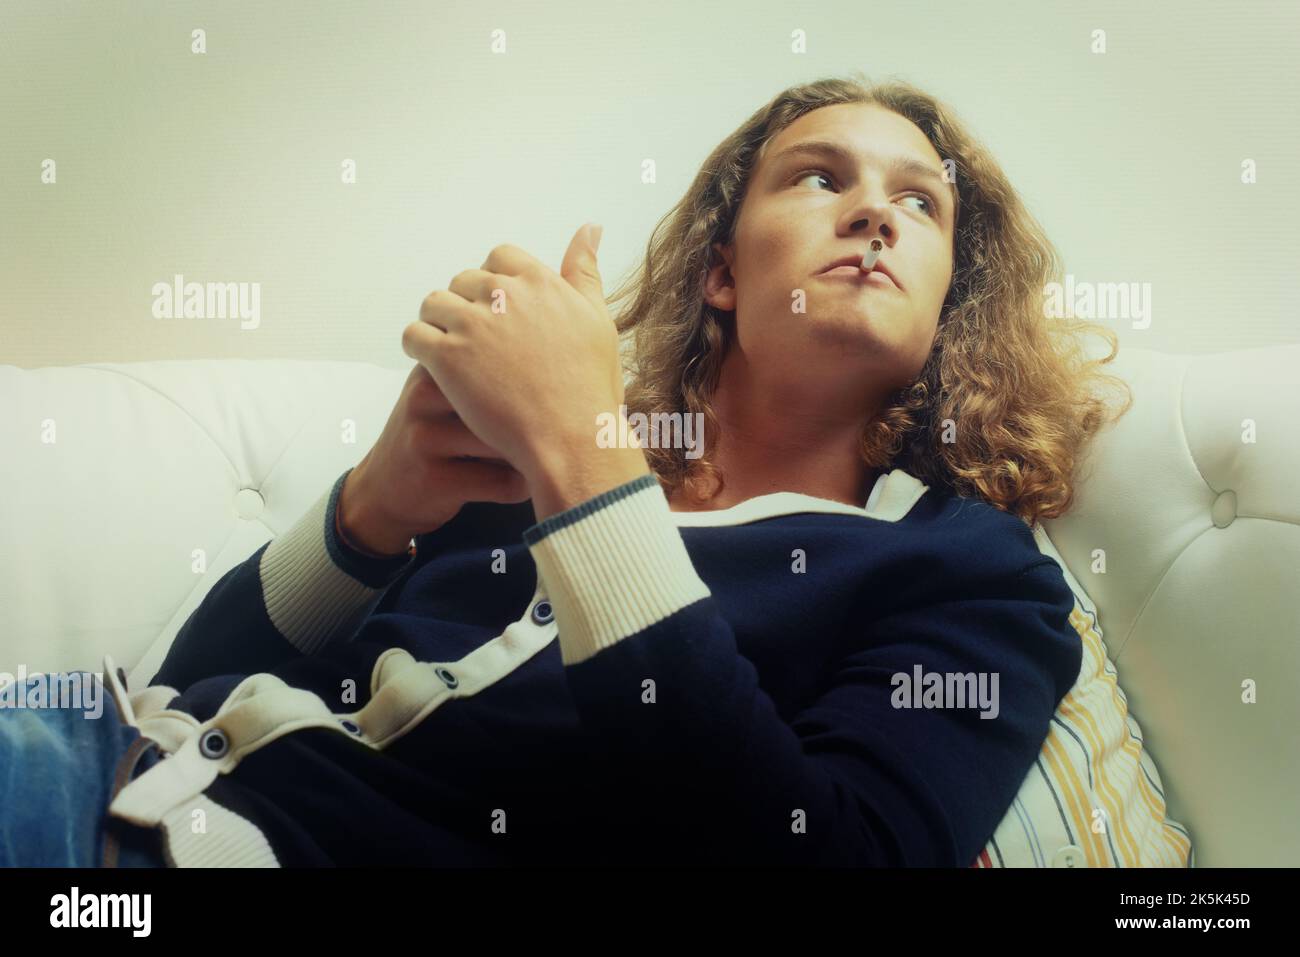 Lighting up. A handsome young man lighting a cigarette, while sitting on a sofa. Stock Photo